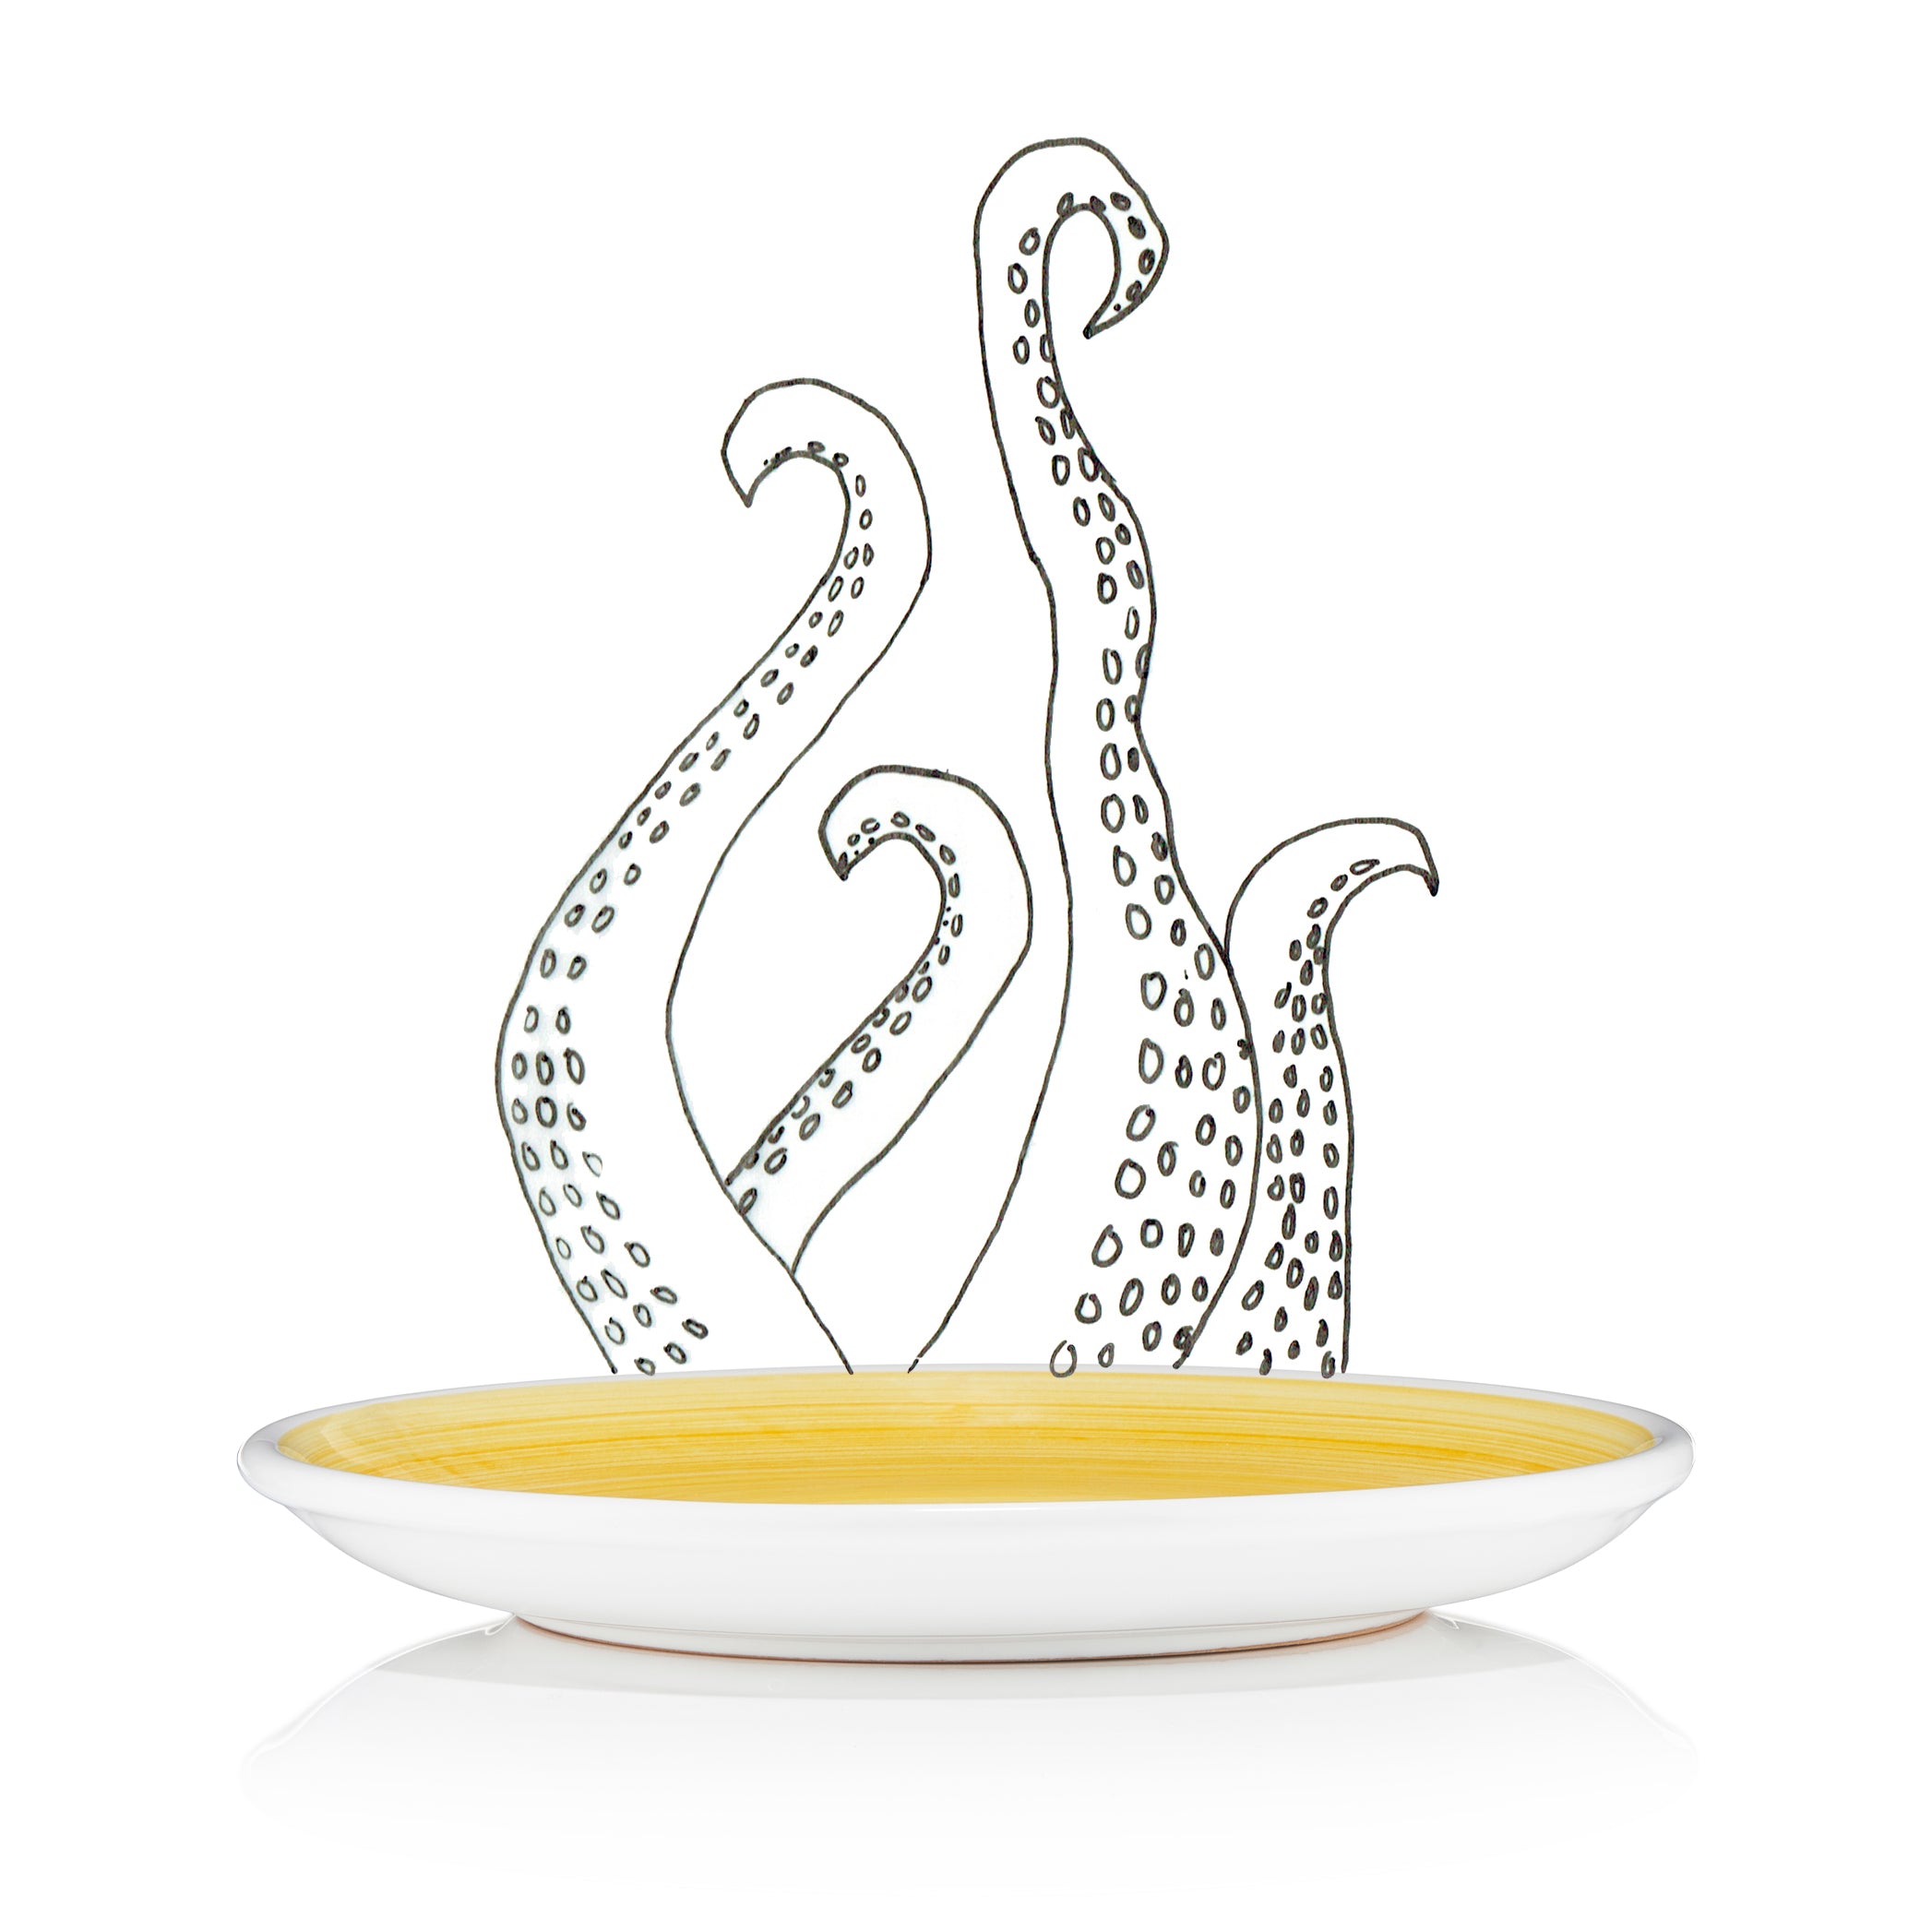 S&B 'Brushed' Ceramic Side Plate in Yellow, 21cm